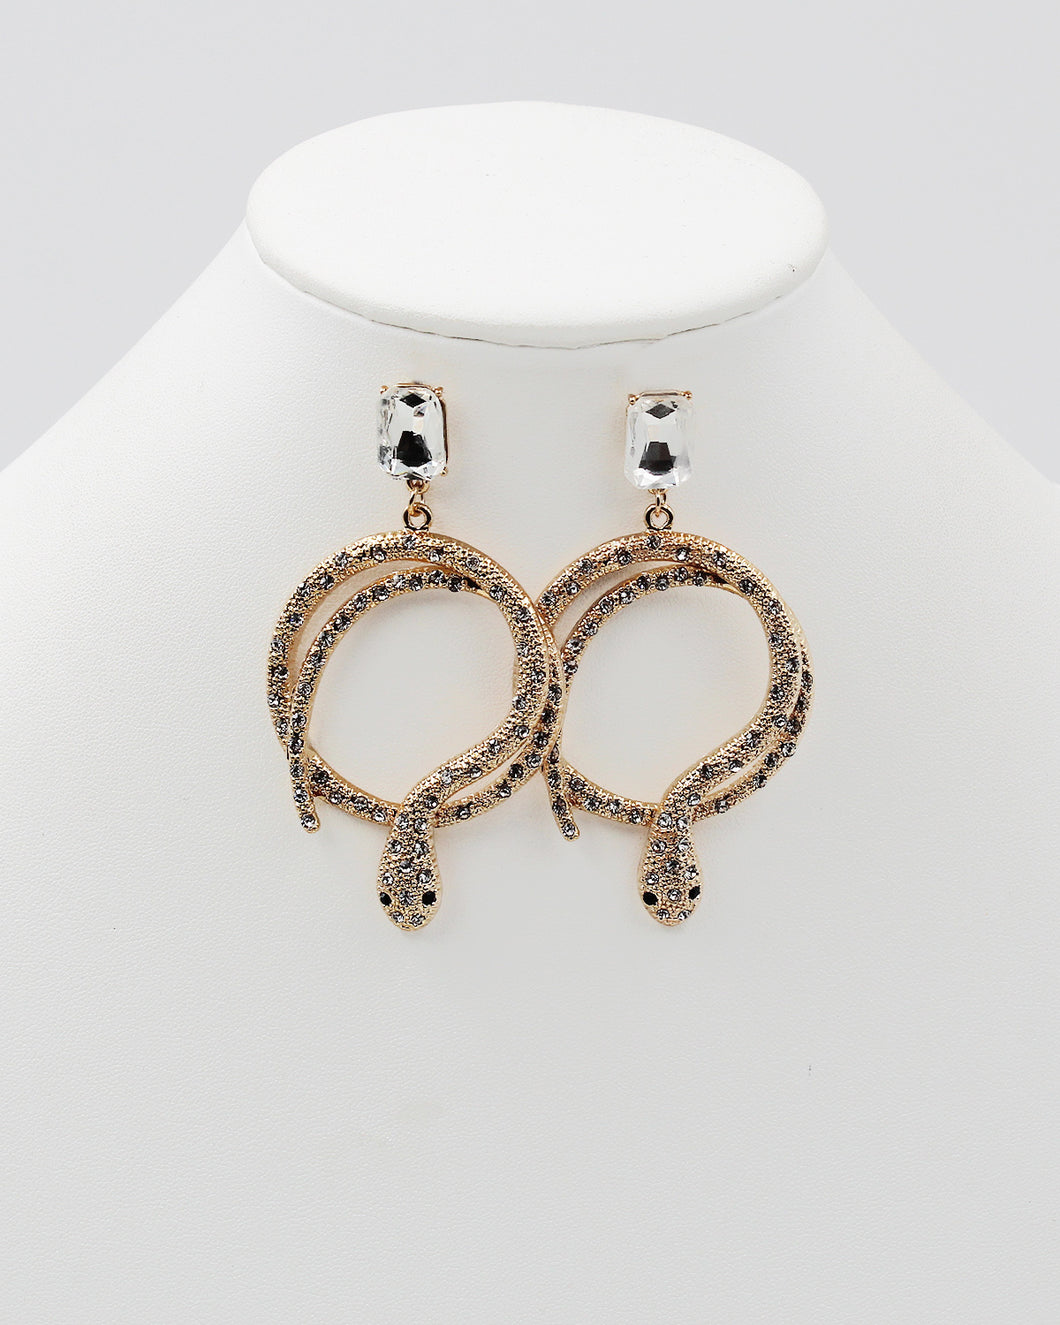 Golden Snake Earrings with Clear Stones